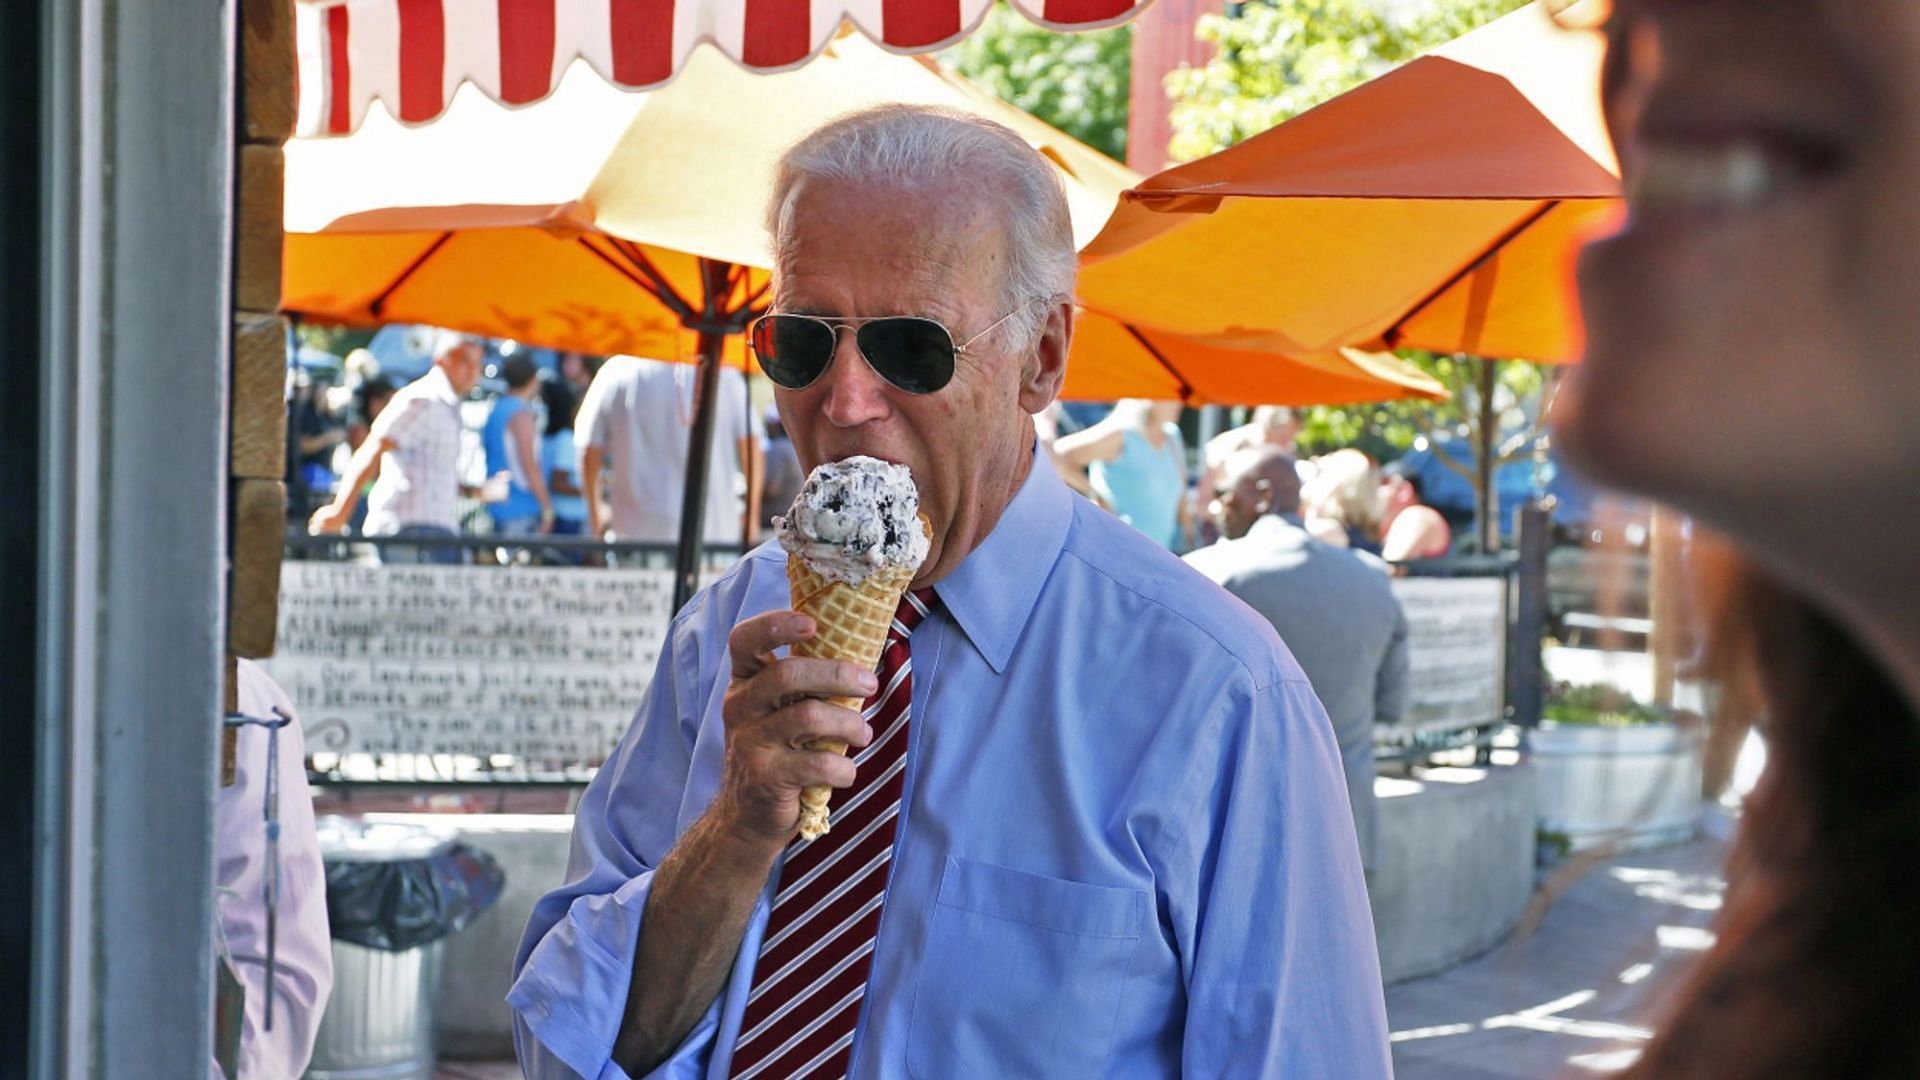 Reuters receives backlash for reporting on Joe Biden spoof video. (Image via Getty Images)